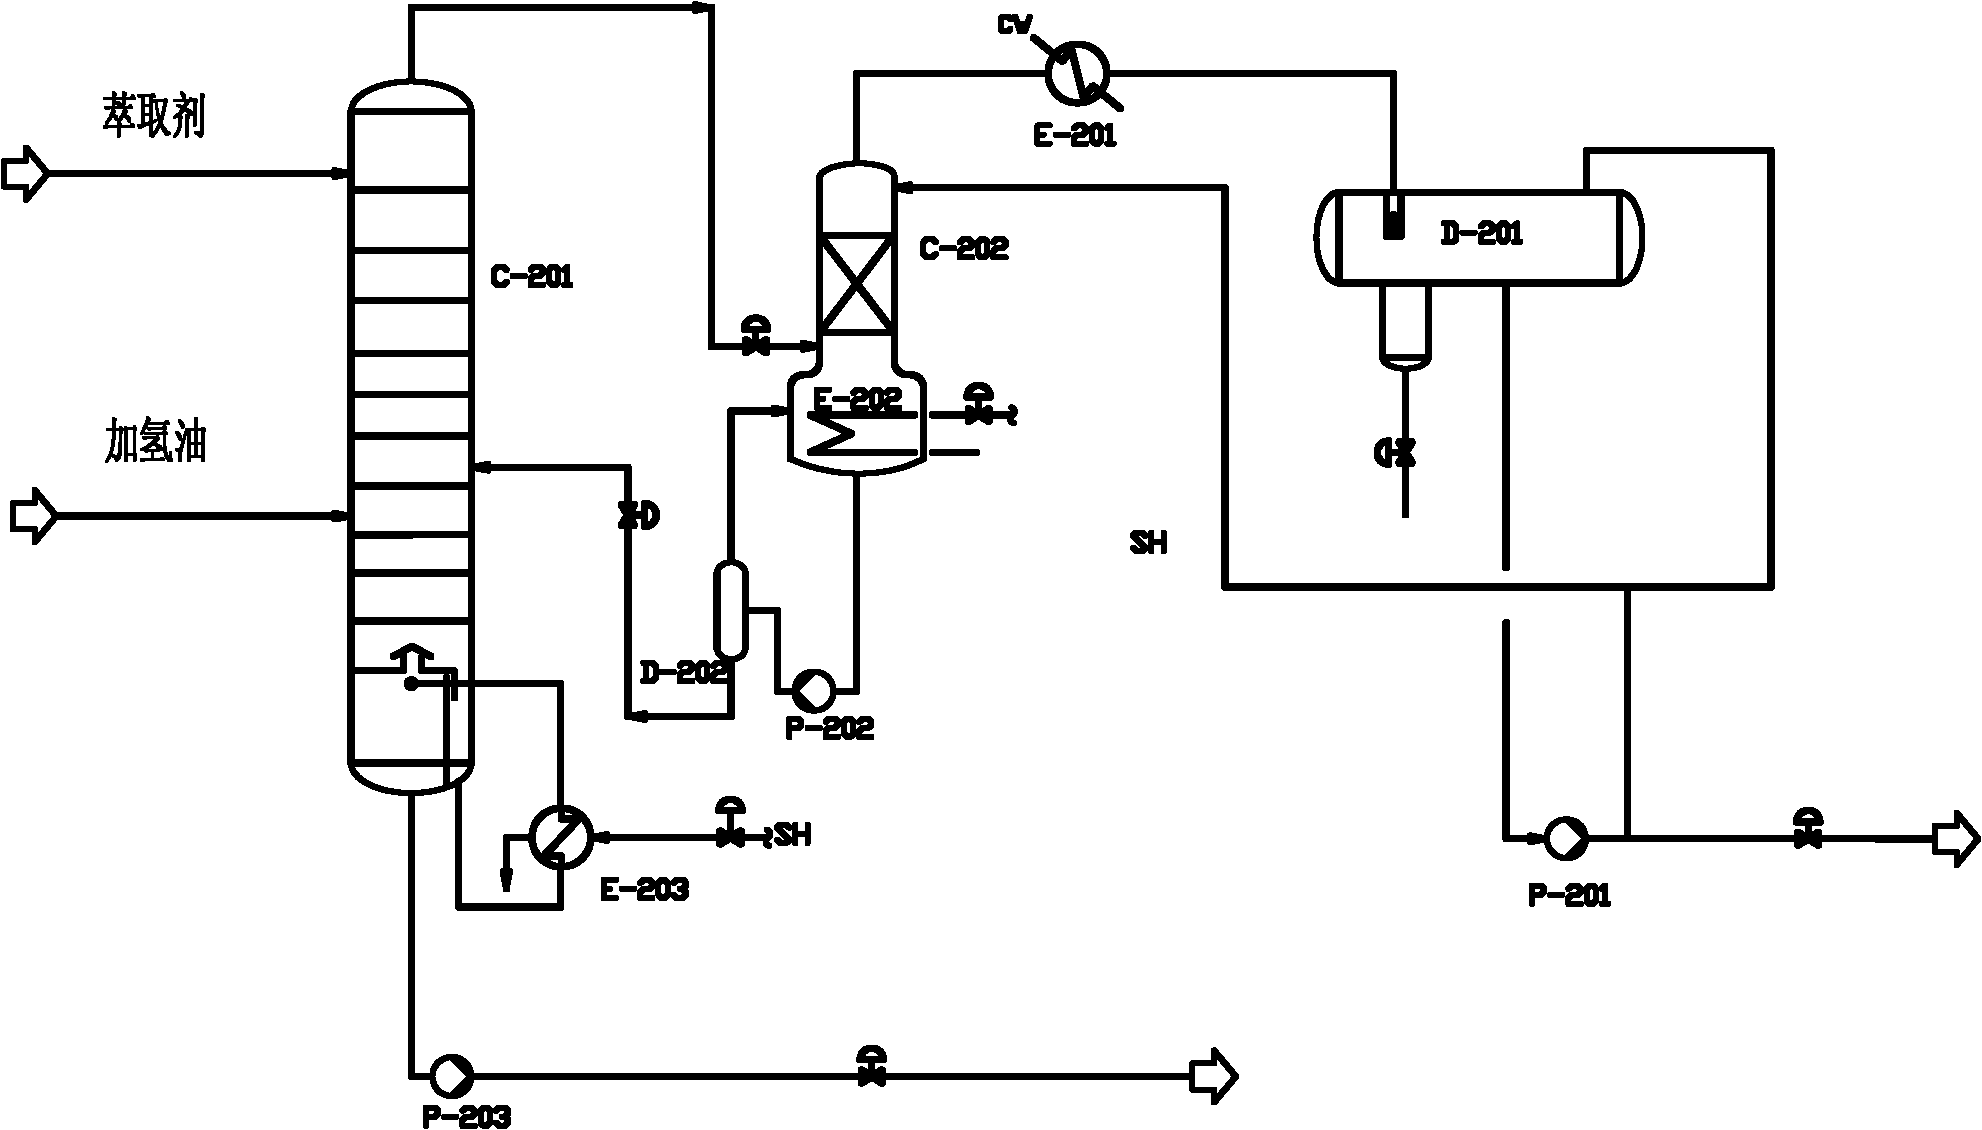 Extractive distillation process in hydrofining process of crude benzene